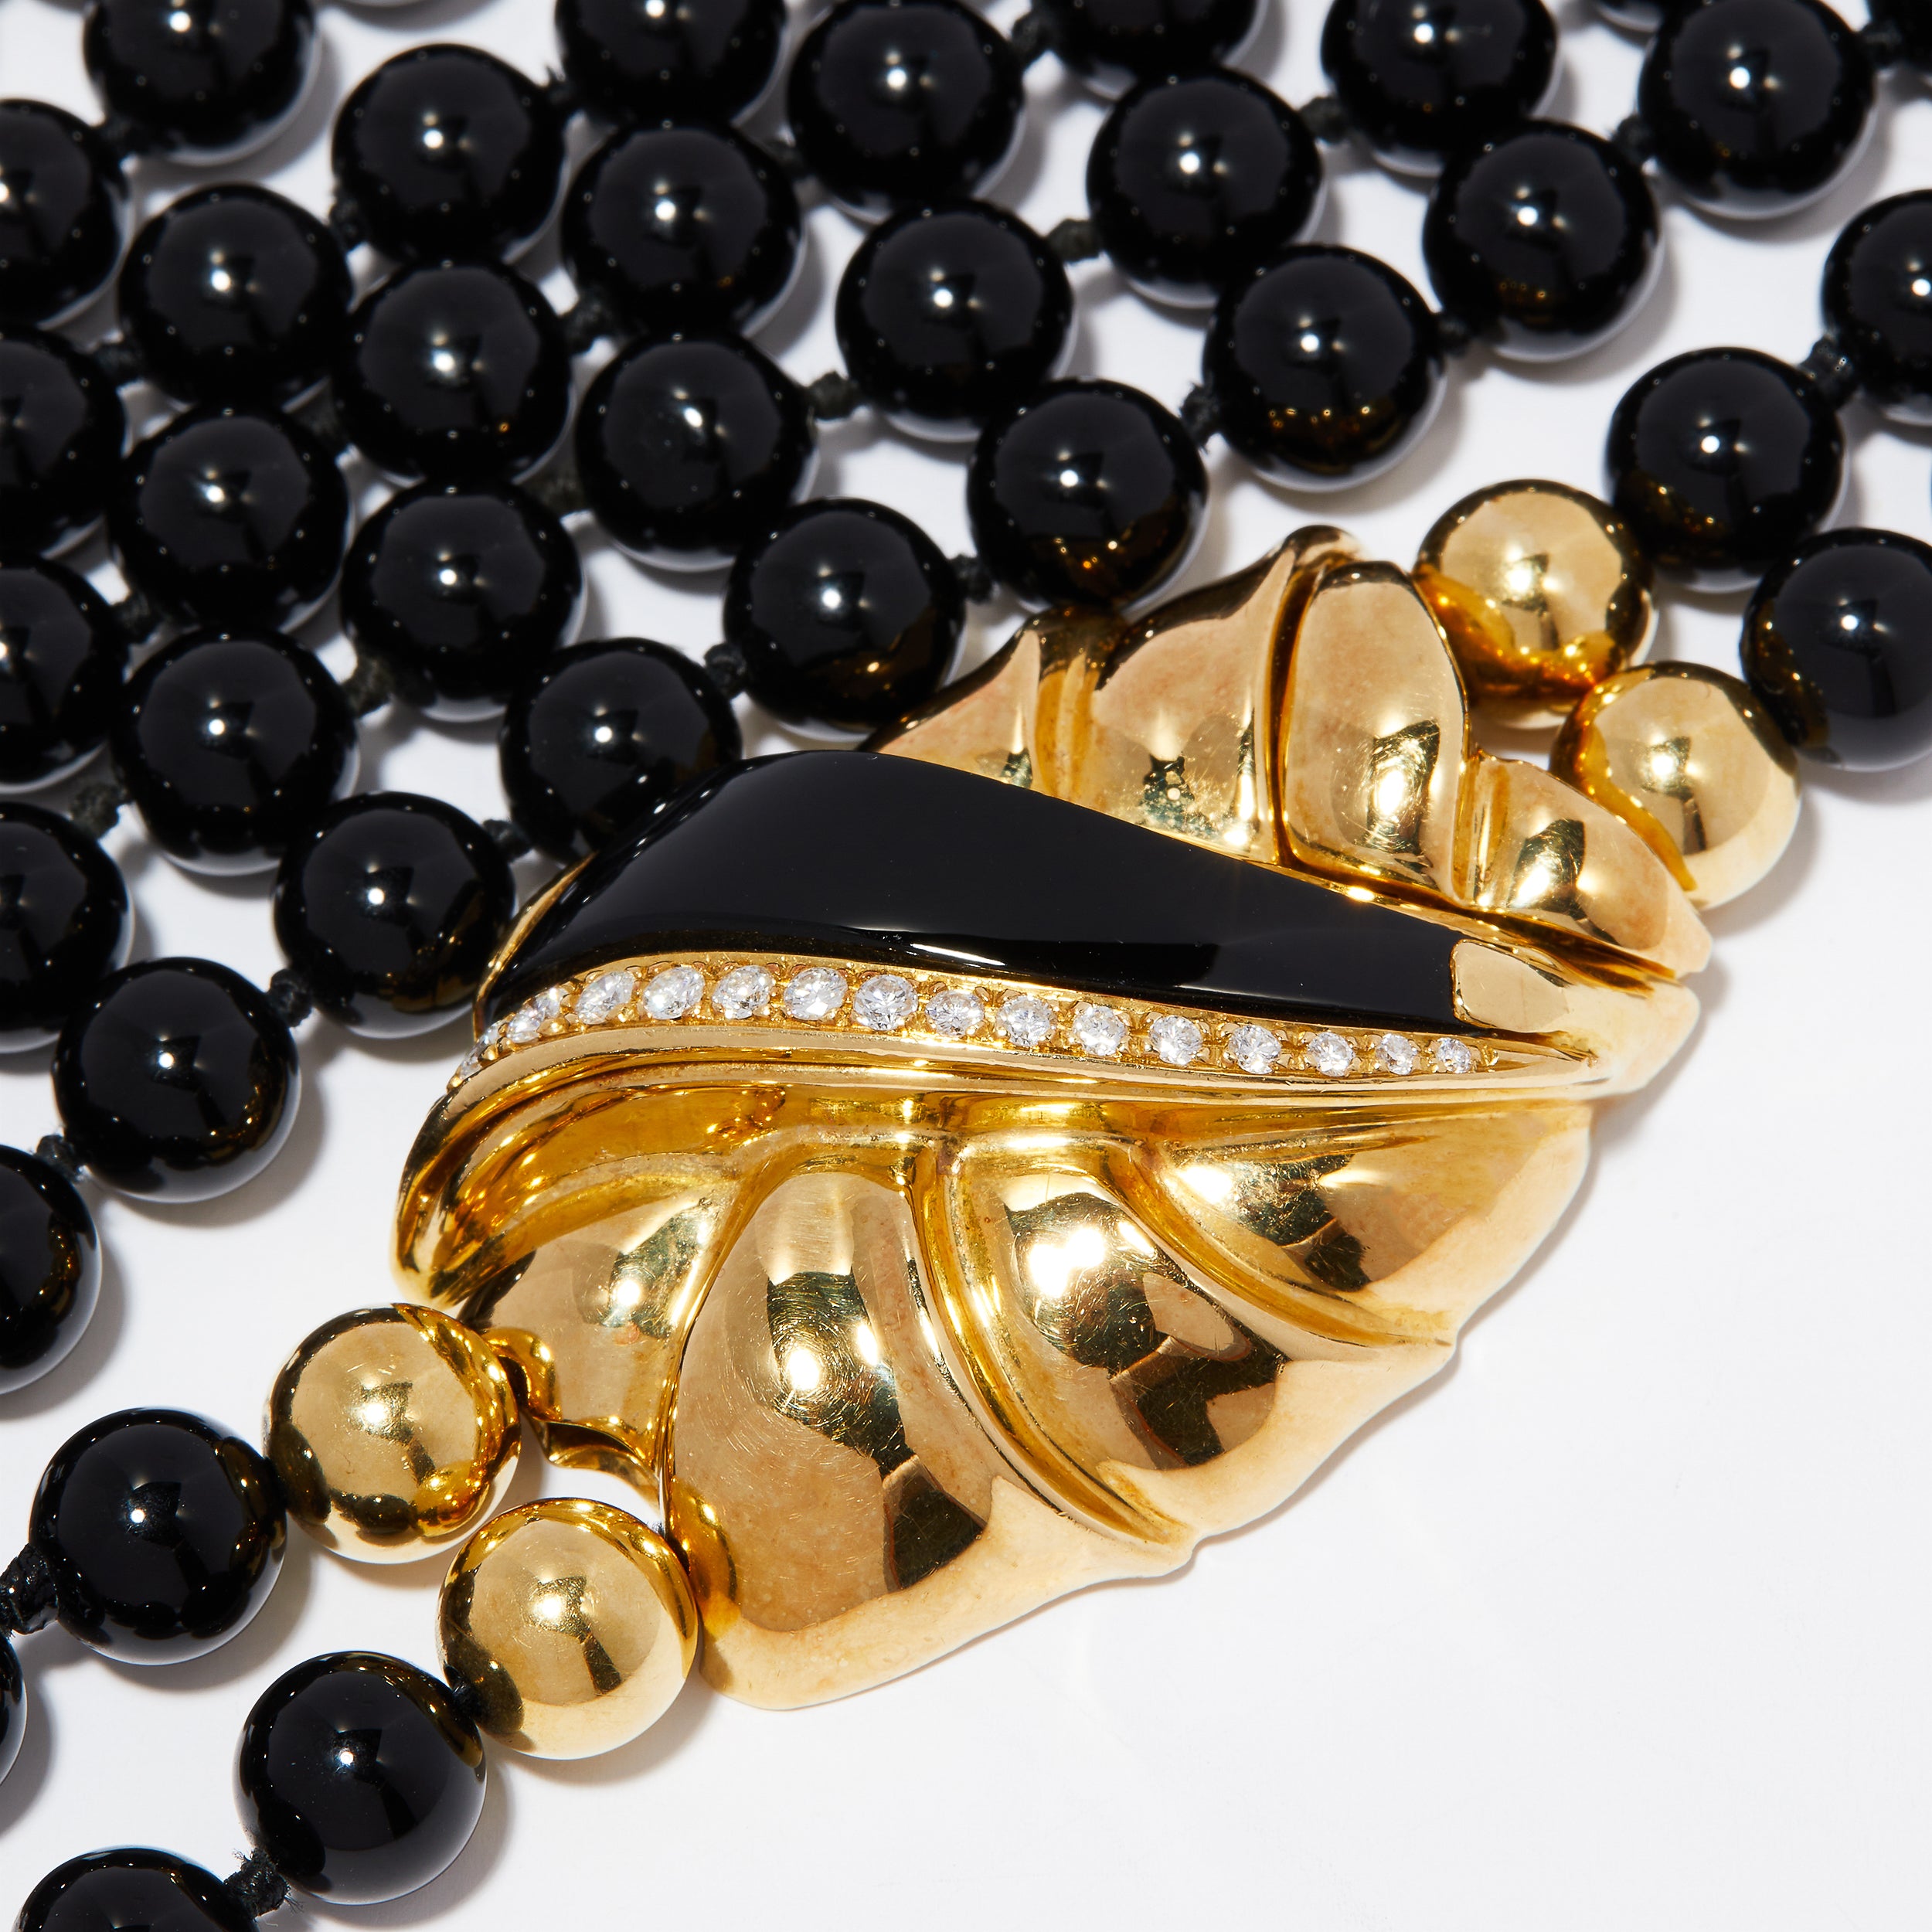 18ct gold and diamond clasp on vintage black onyx necklace.